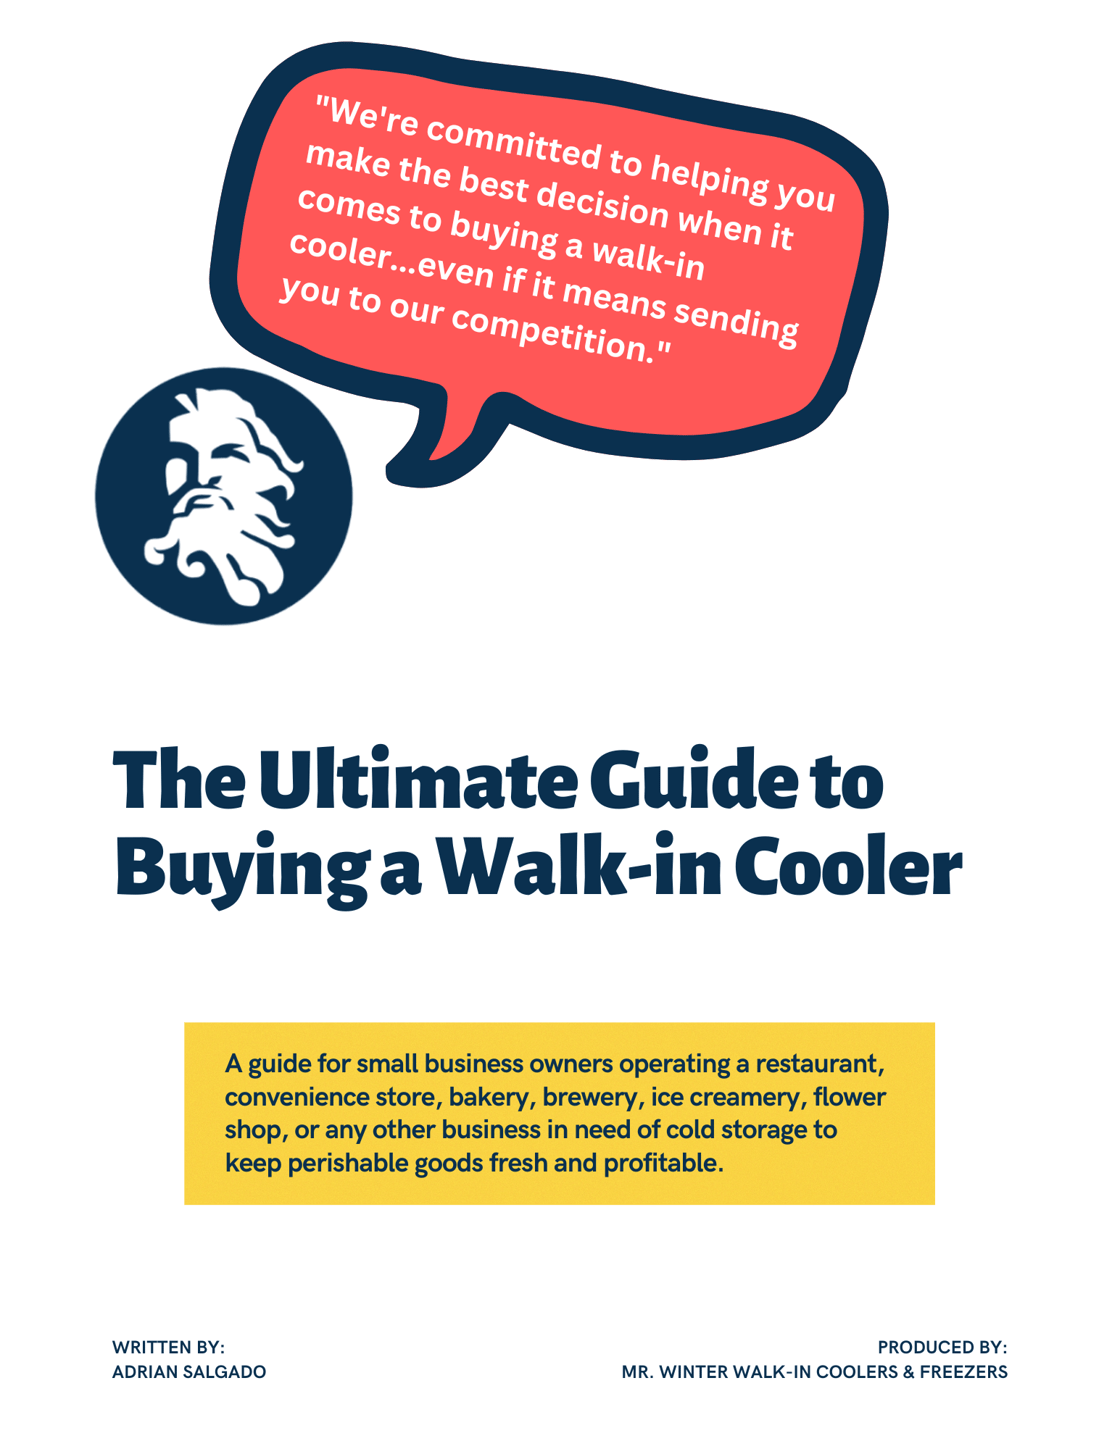 PDF Cover_How to Buy a Walk-in Cooler